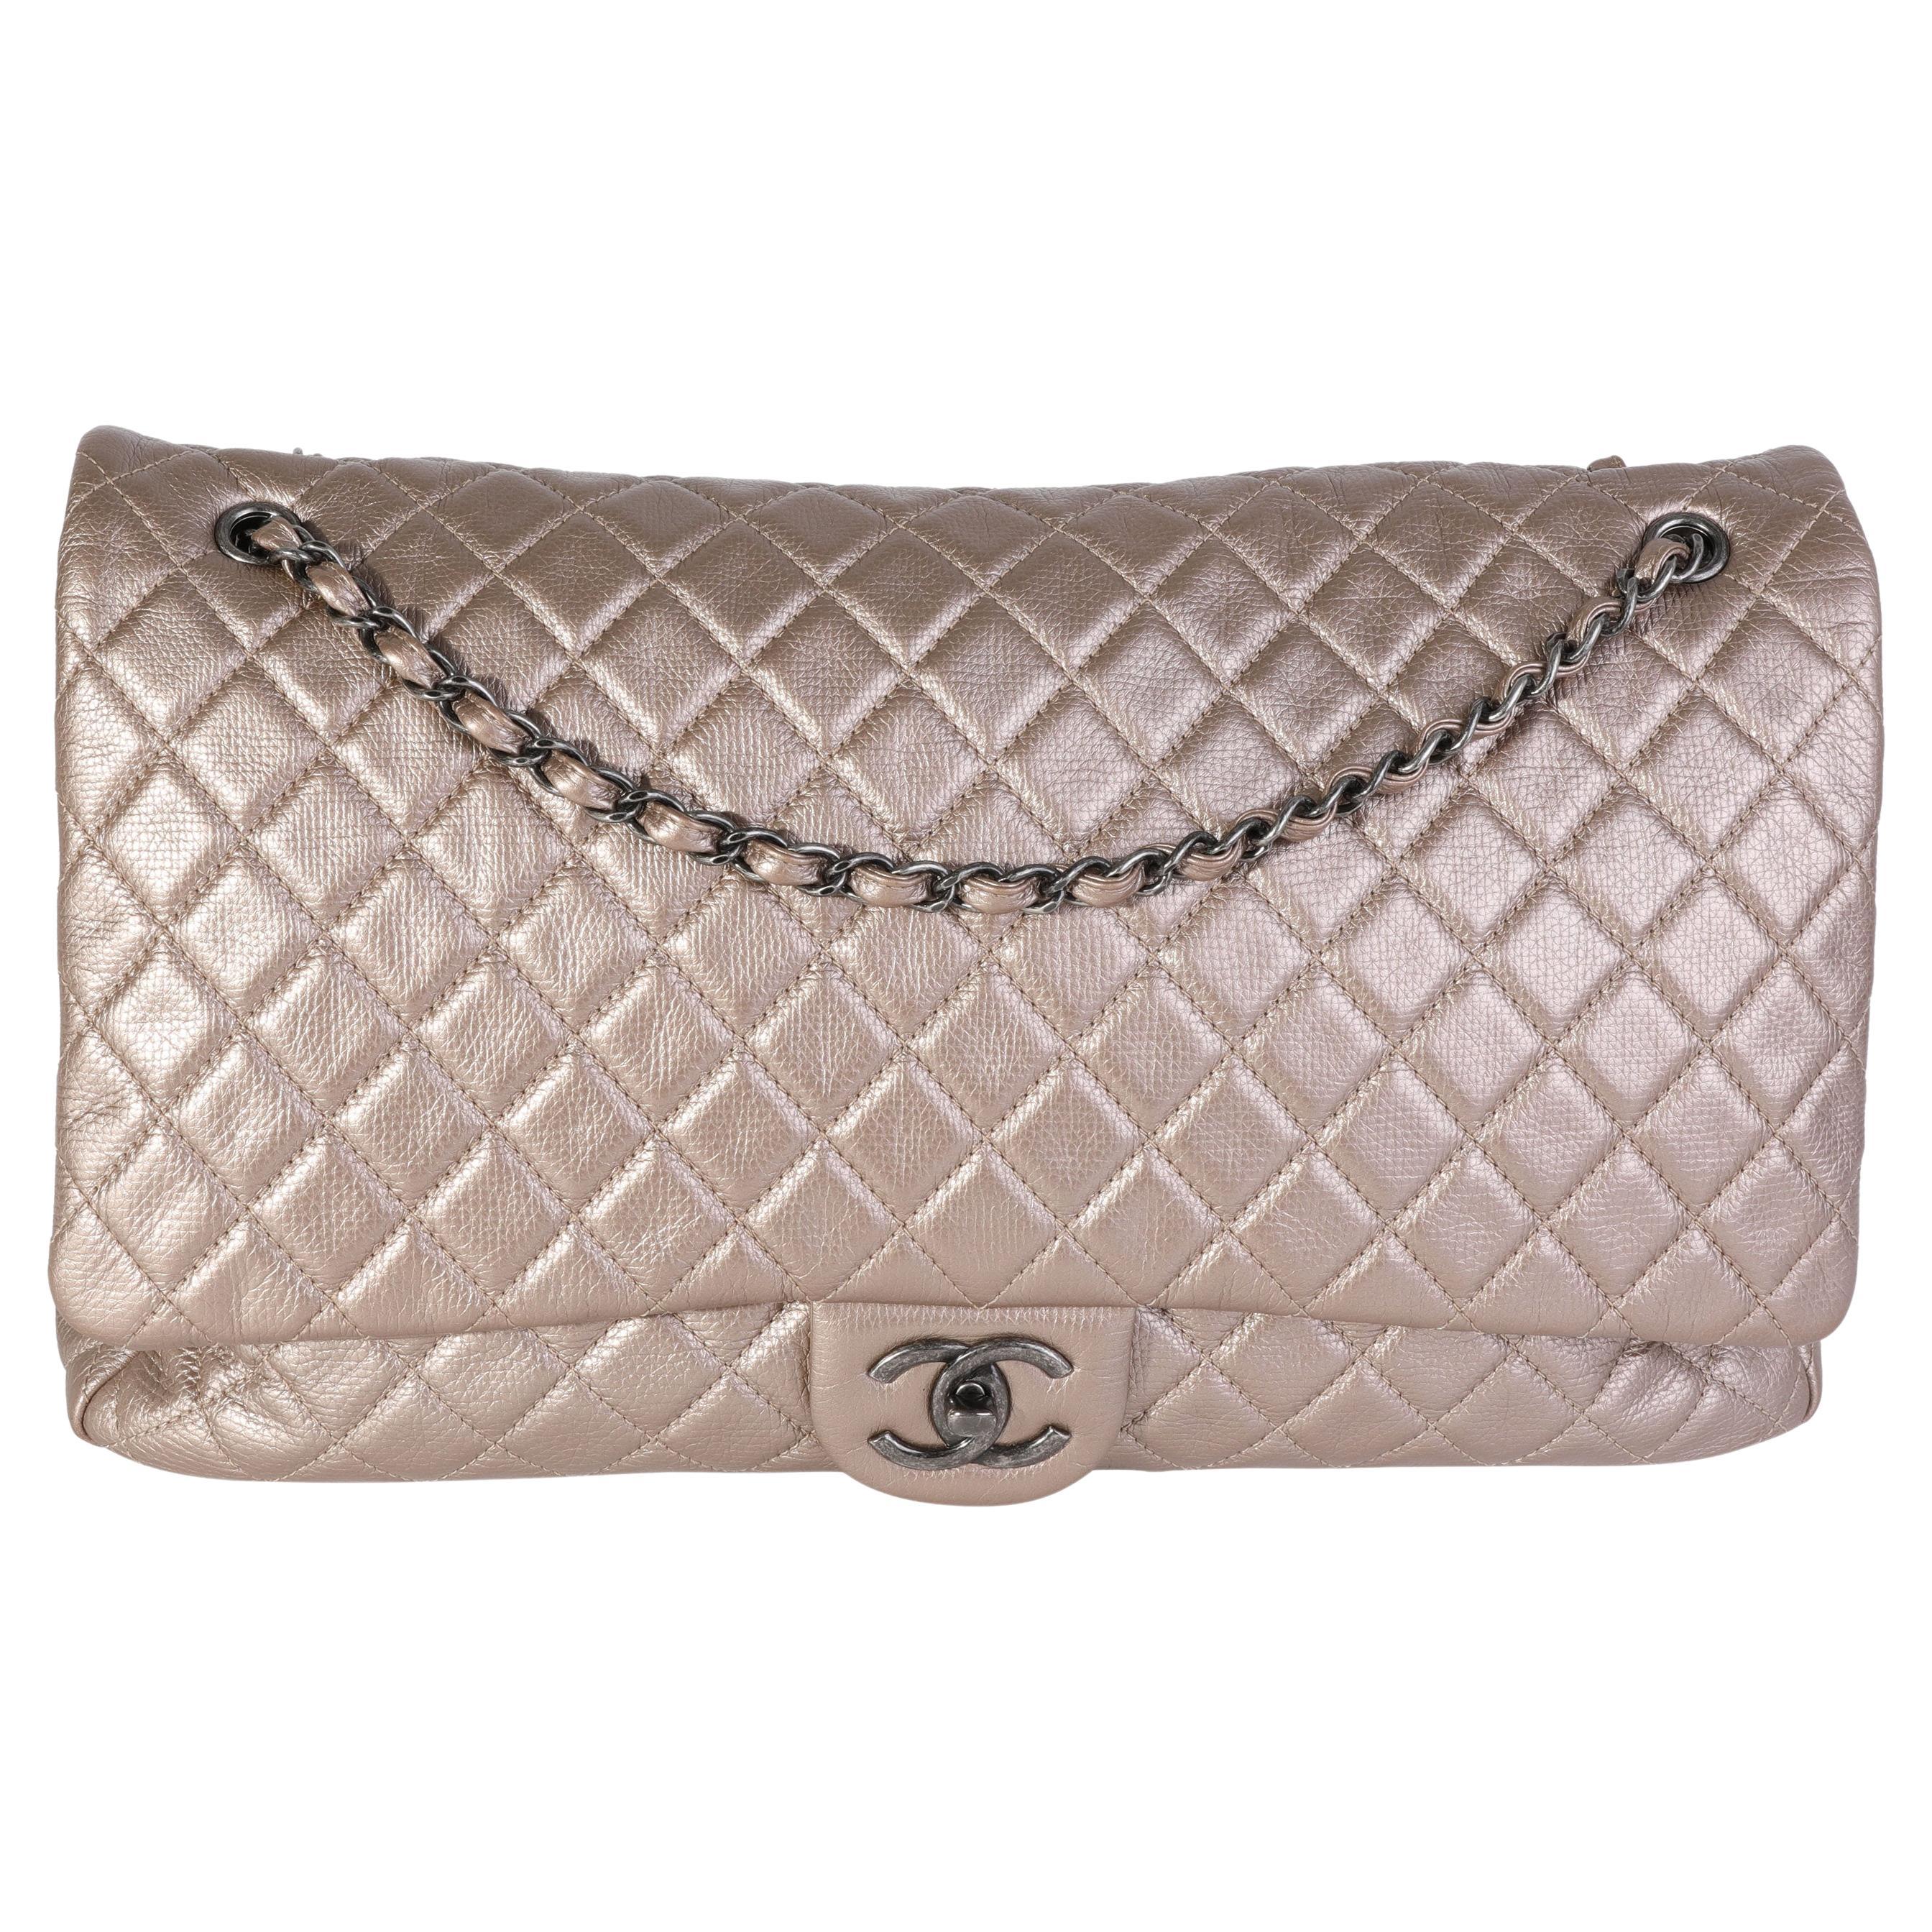 Chanel Metallic Gold Quilted Calfskin Chanel Airlines XXL Travel Flap Bag